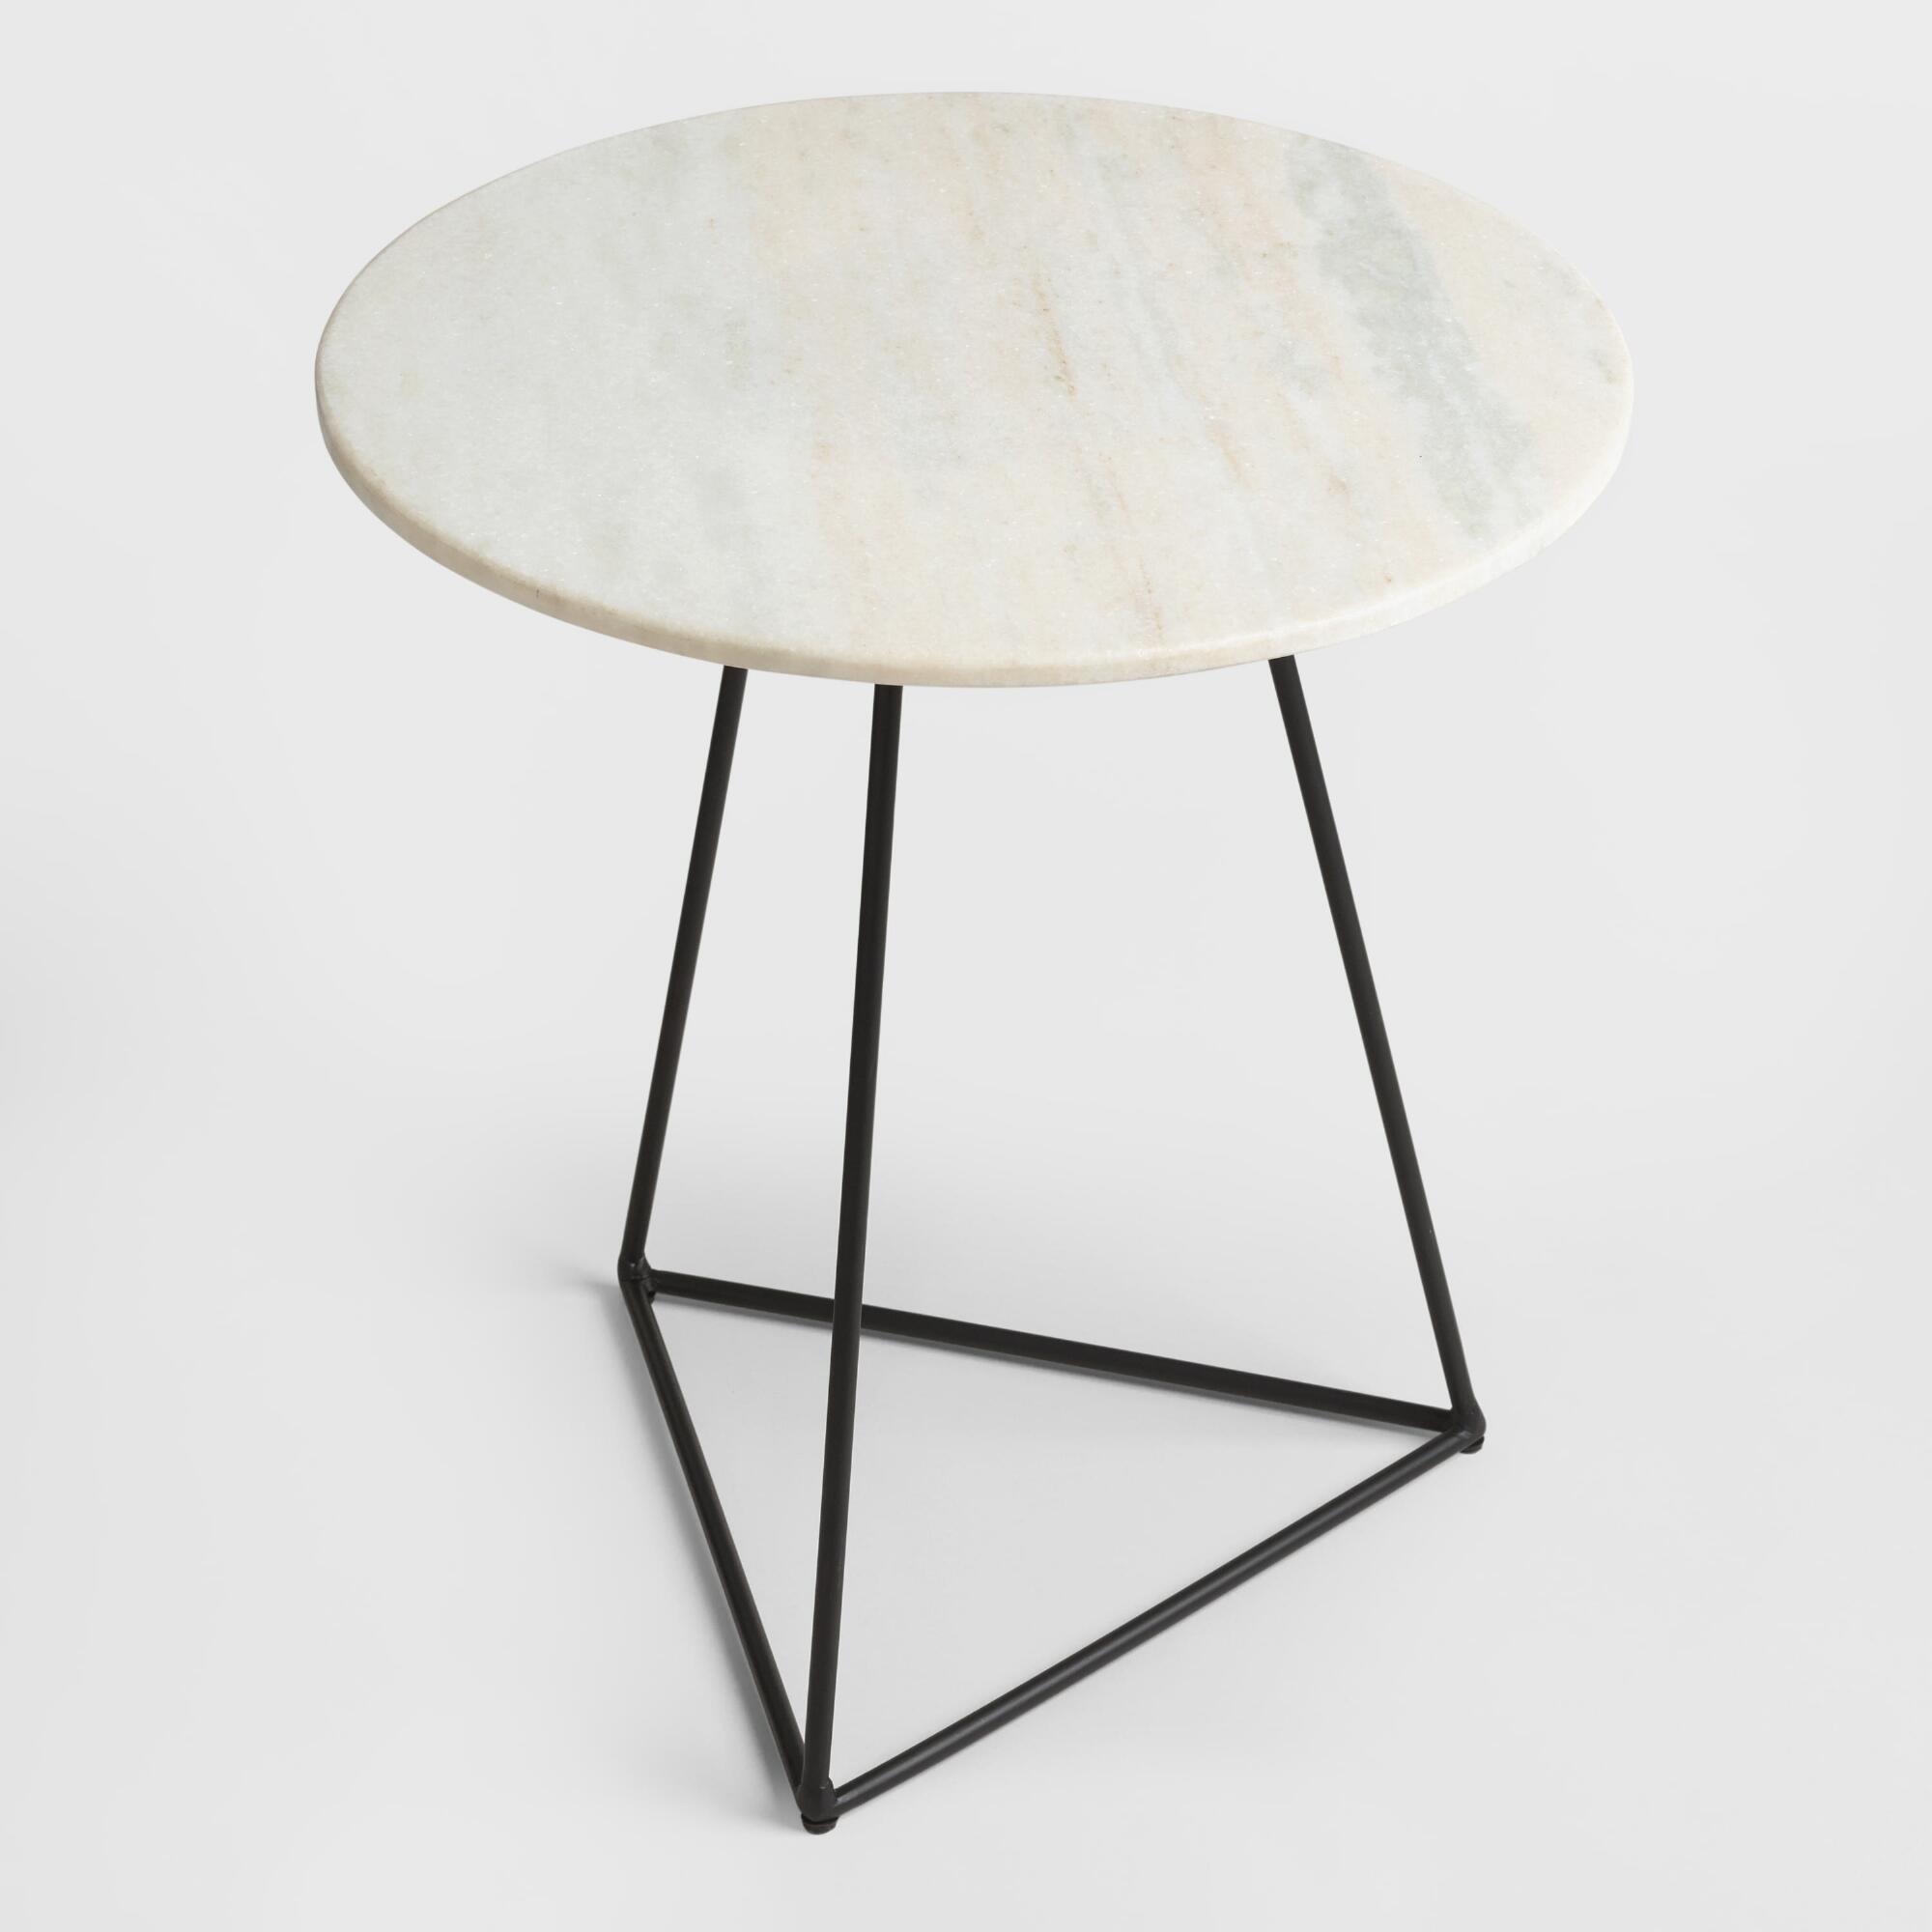 small folding side table the super beautiful covers for white marble and metal round accent world market iipsrv fcgi end tables high leg recliner legs oval lift top coffee glass